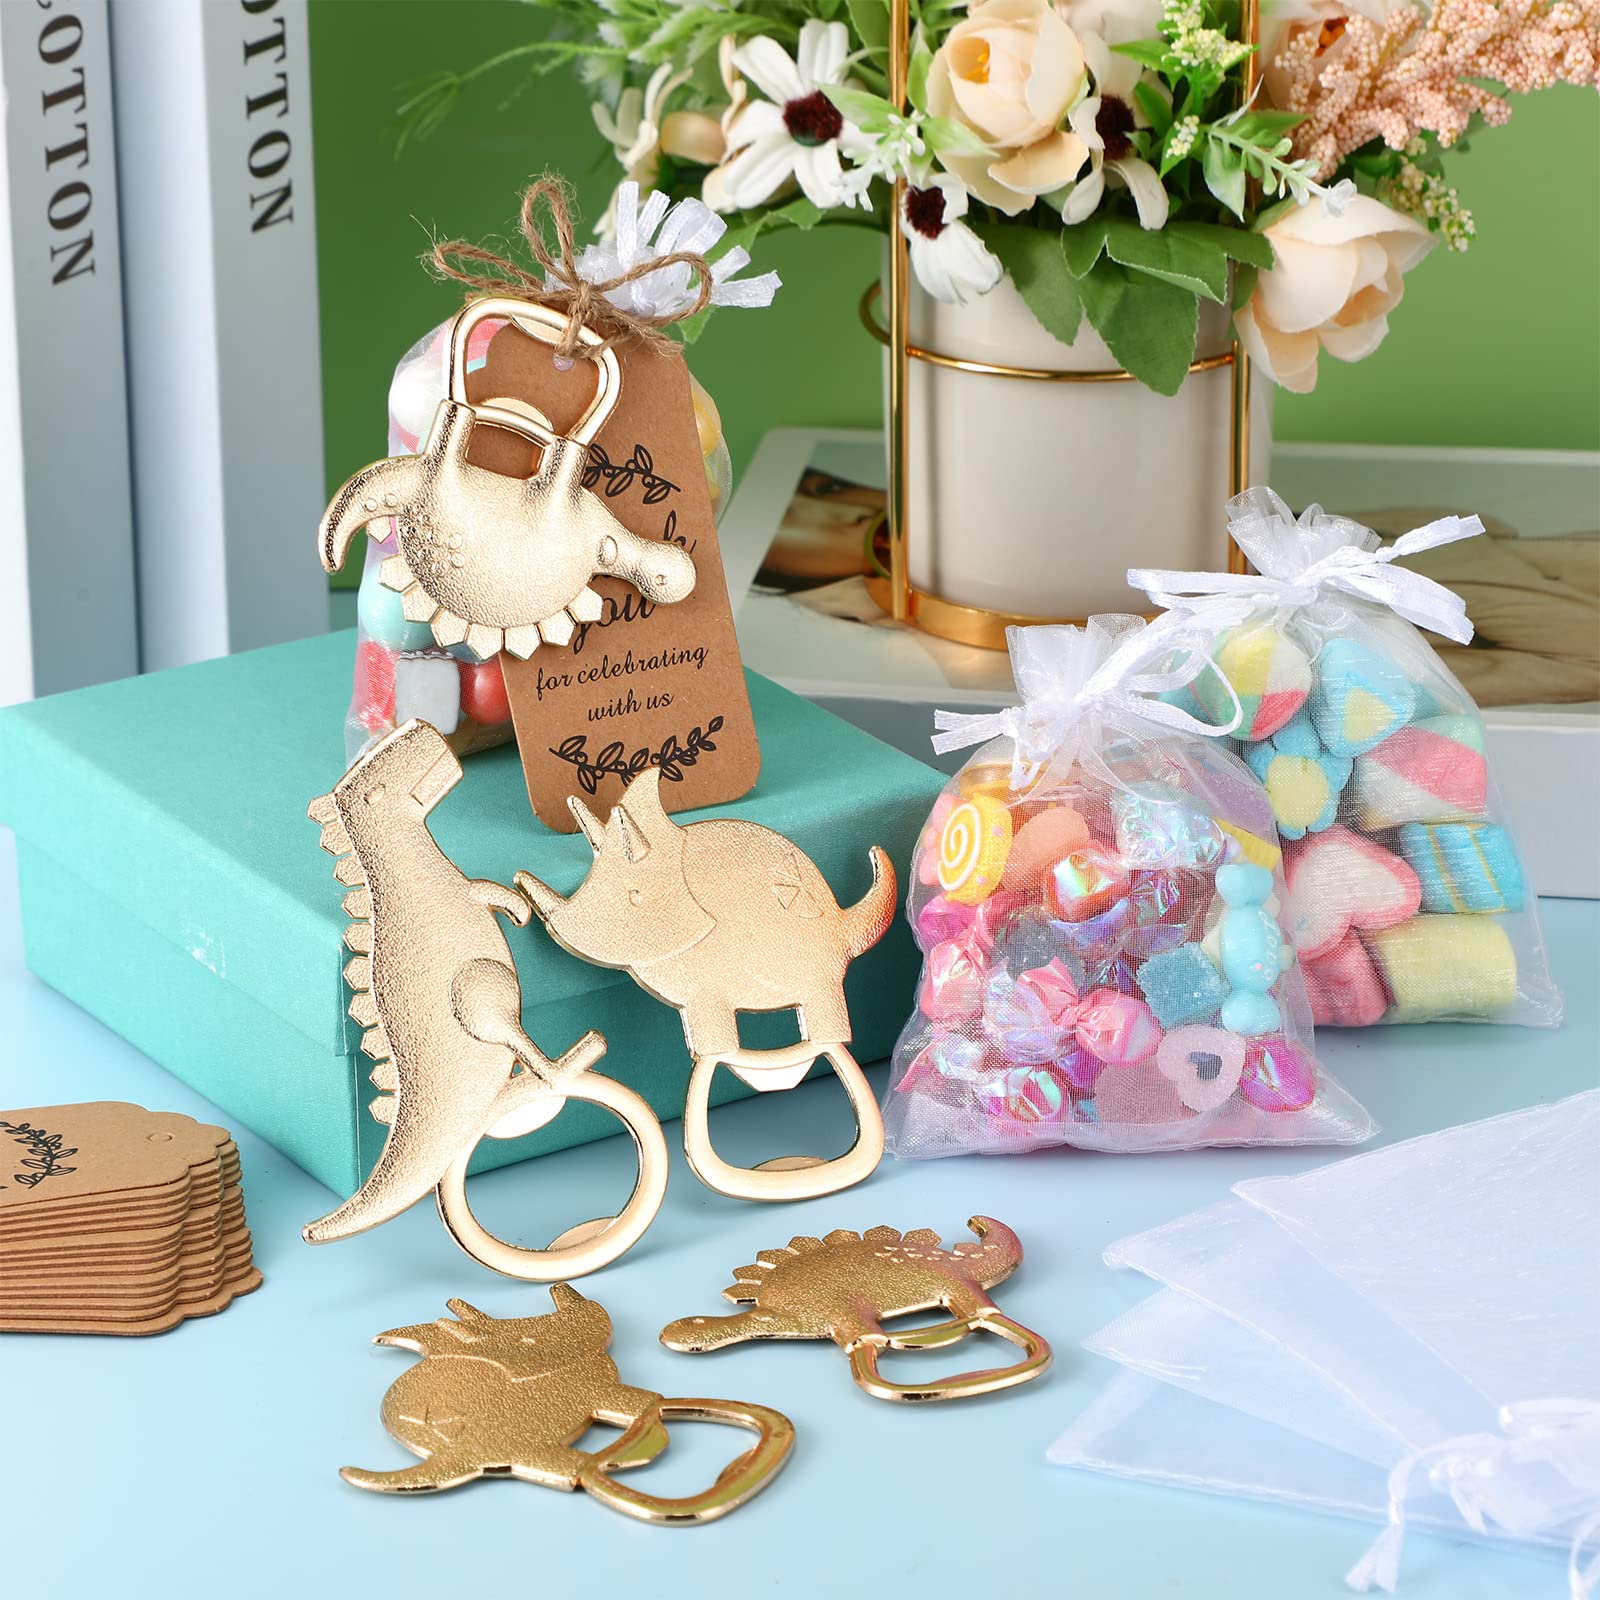 30 Pcs Dinosaur Bottle Openers Baby Shower Return Favors for Guests Bottle Opener Decorations and Souvenirs with Organza Bags Thank You Tags for Dinosaur Party Favors